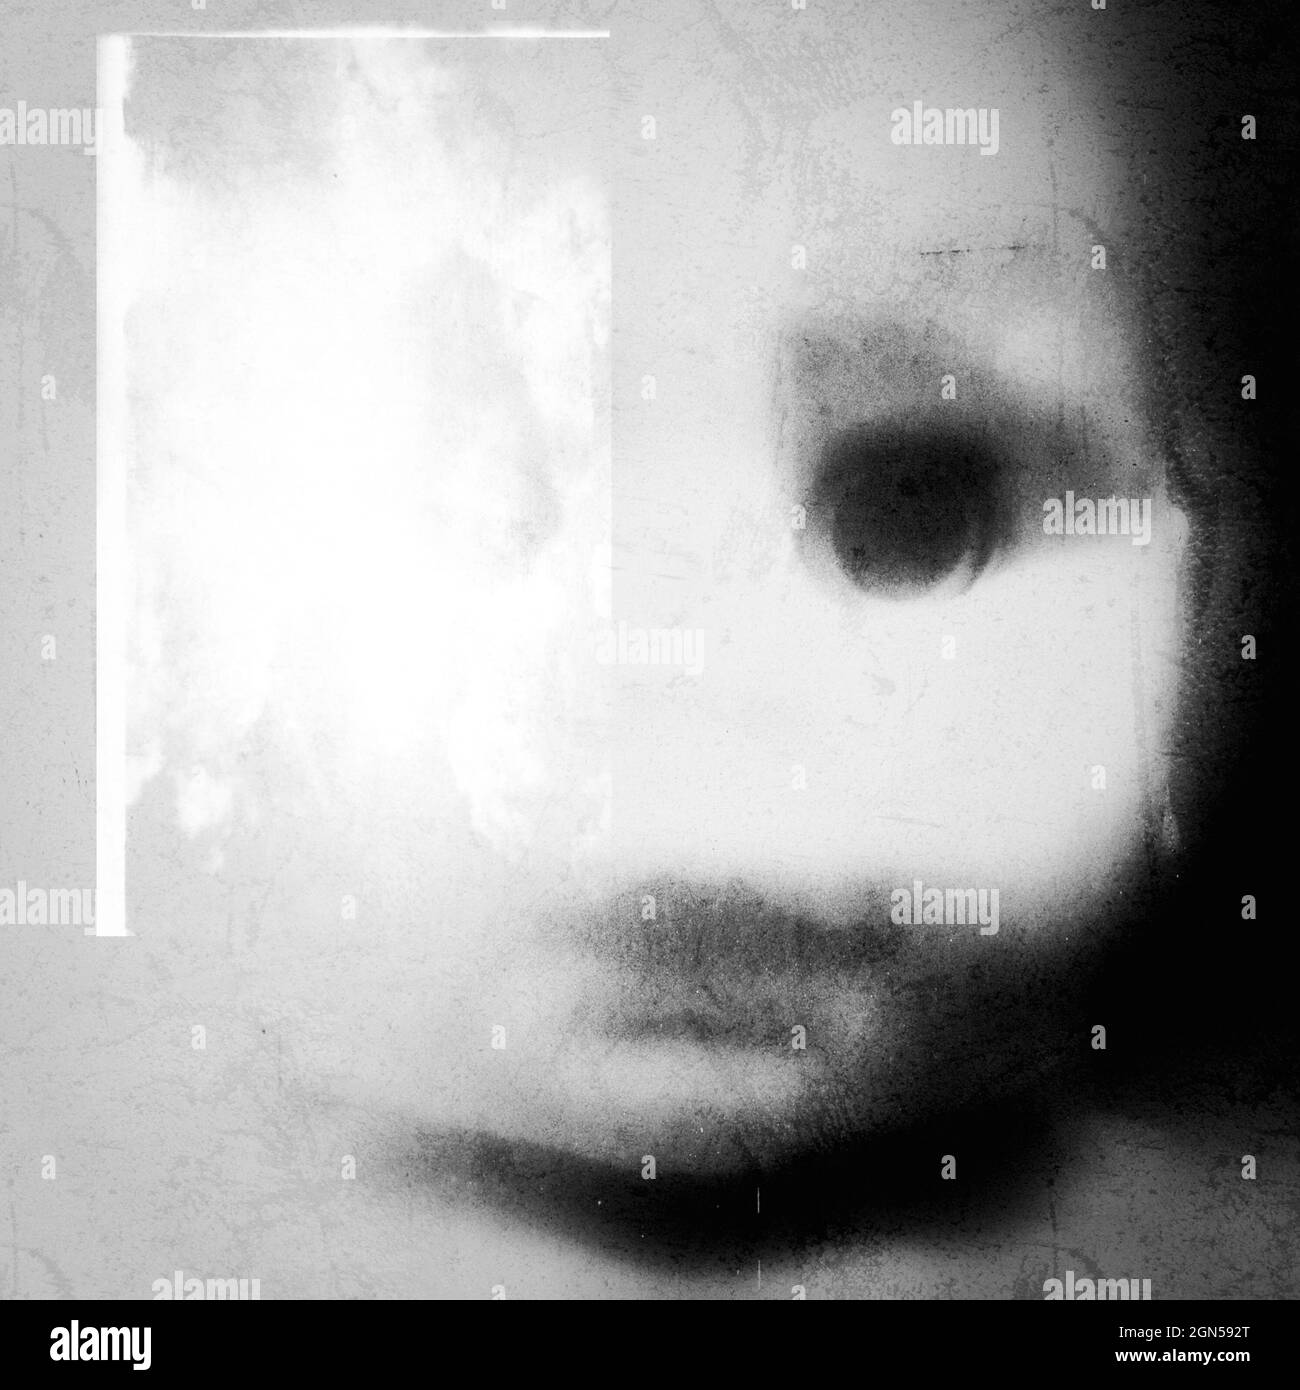 A spooky and disturbing image of a doll on a grunge and old photo effect. Doll head. Surreal doll portrait. Stock Photo